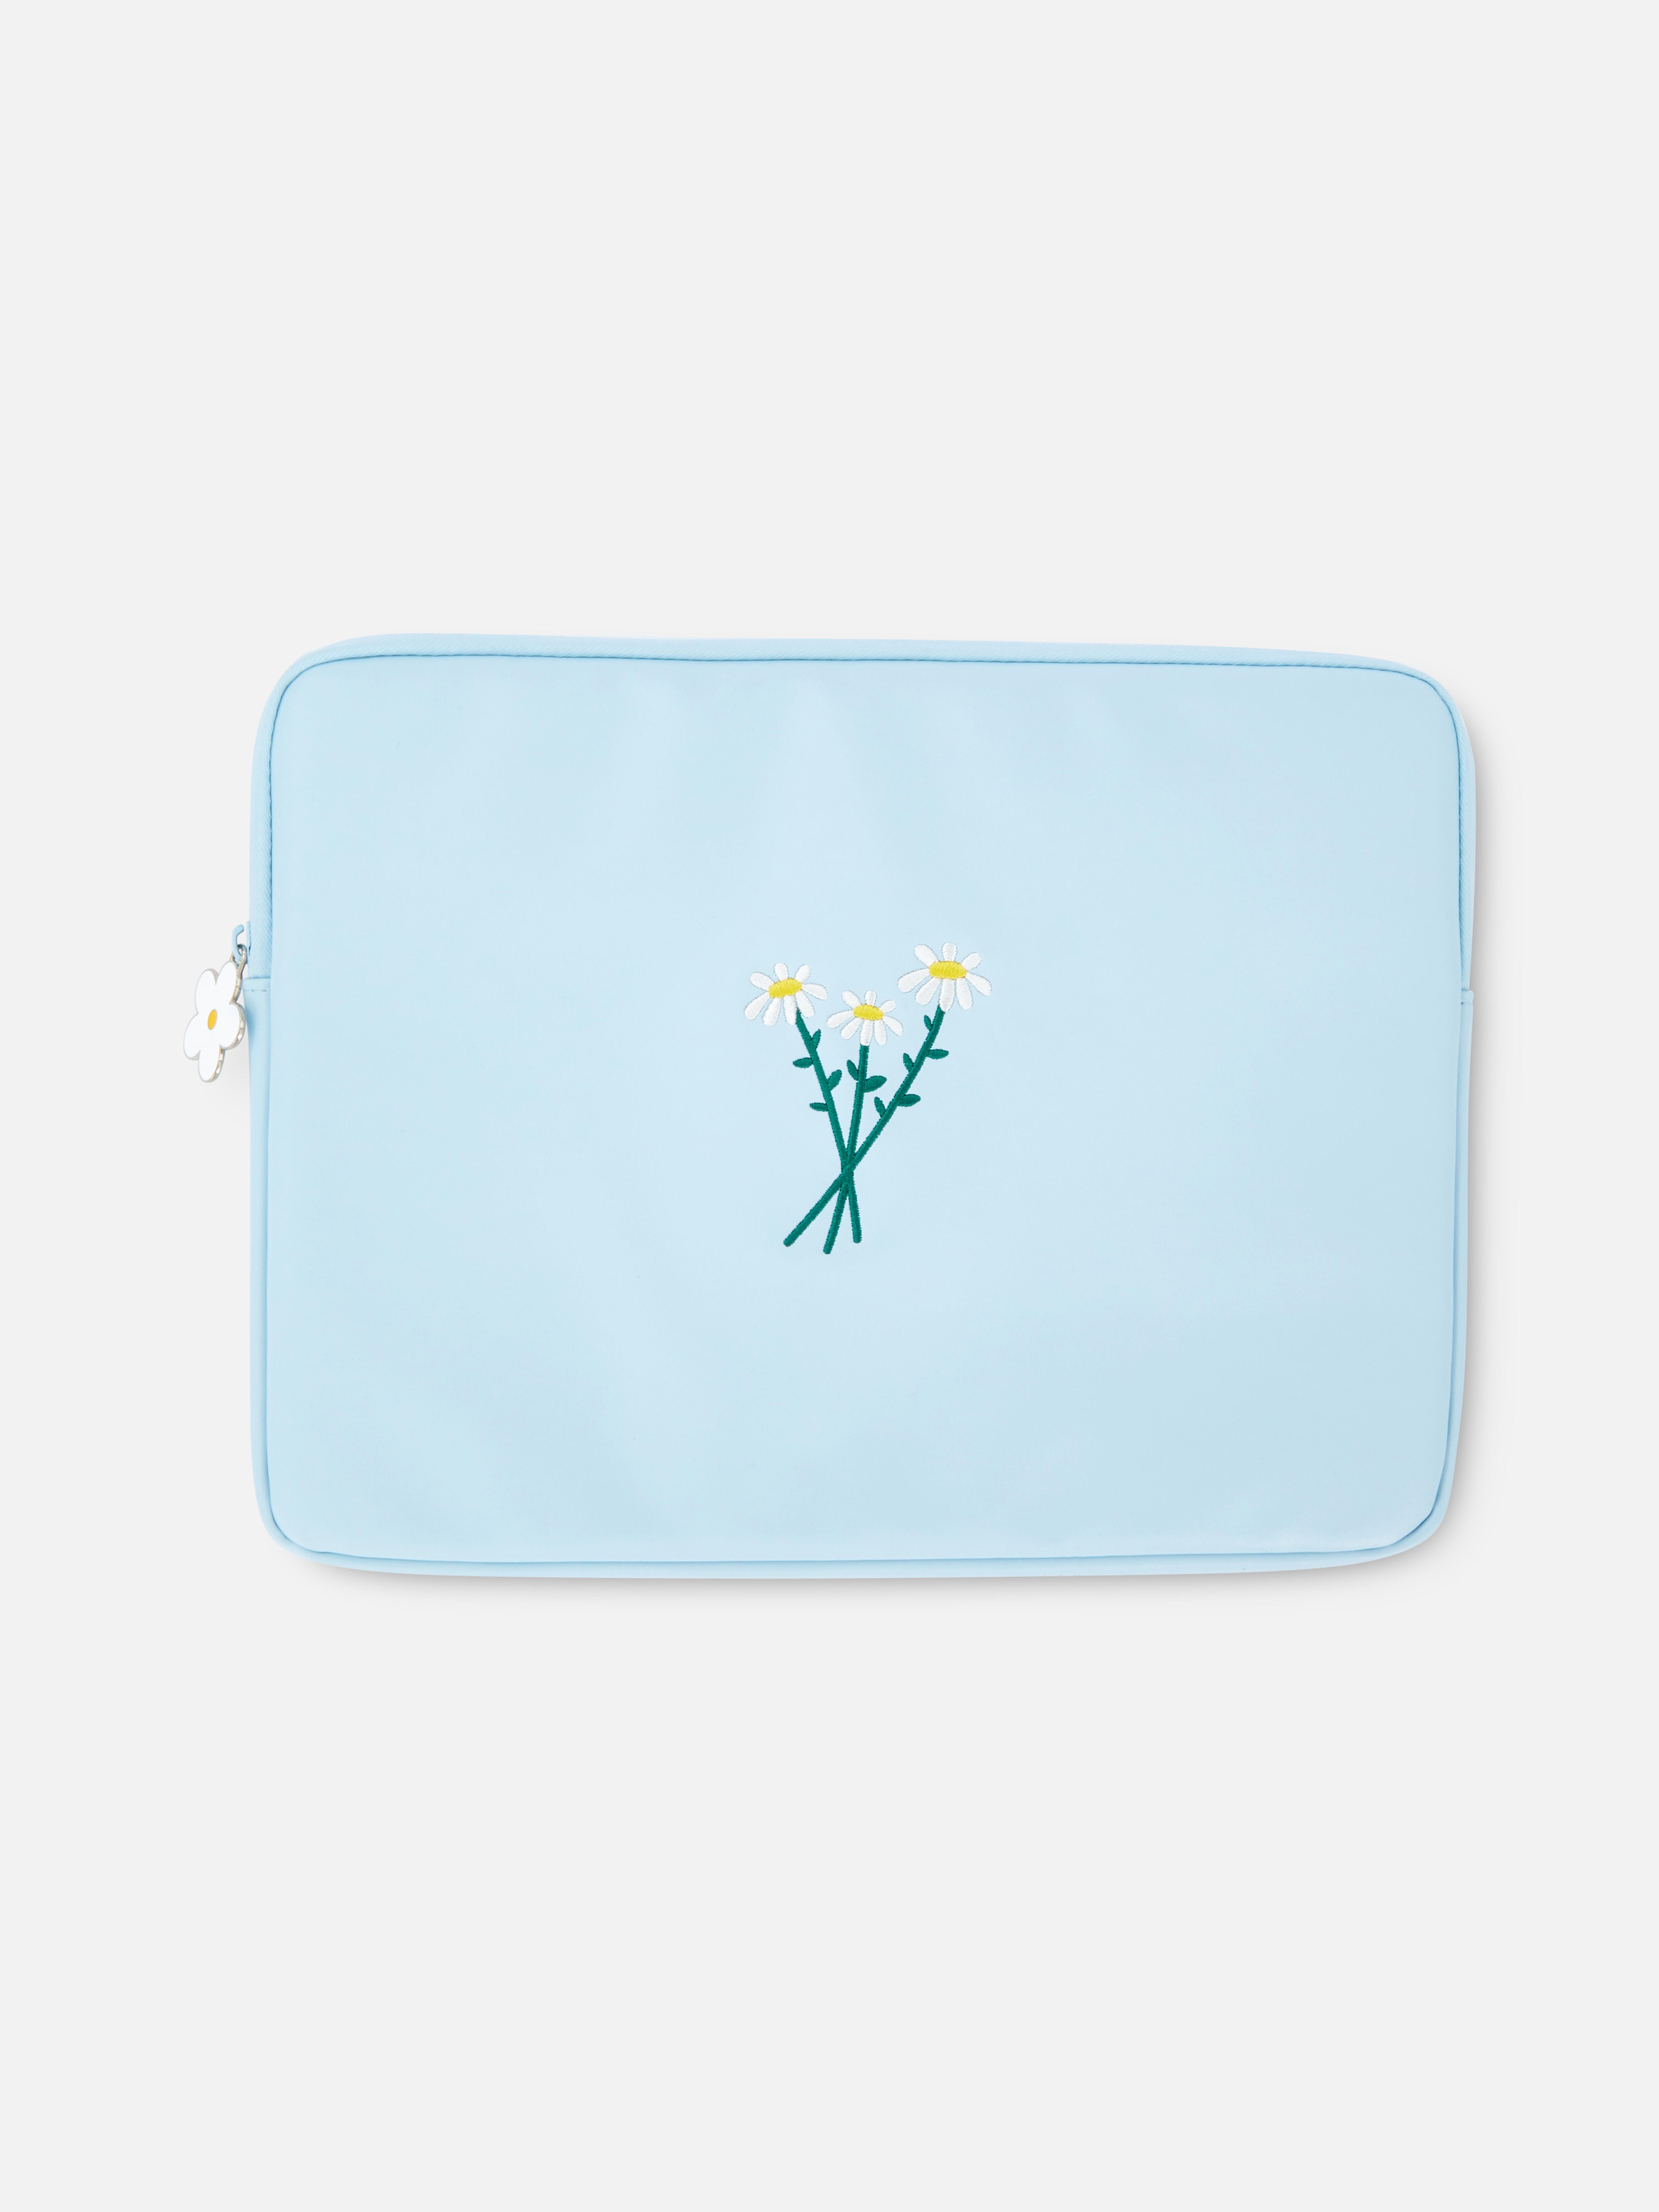 Daisy Embroidered Laptop Sleeve